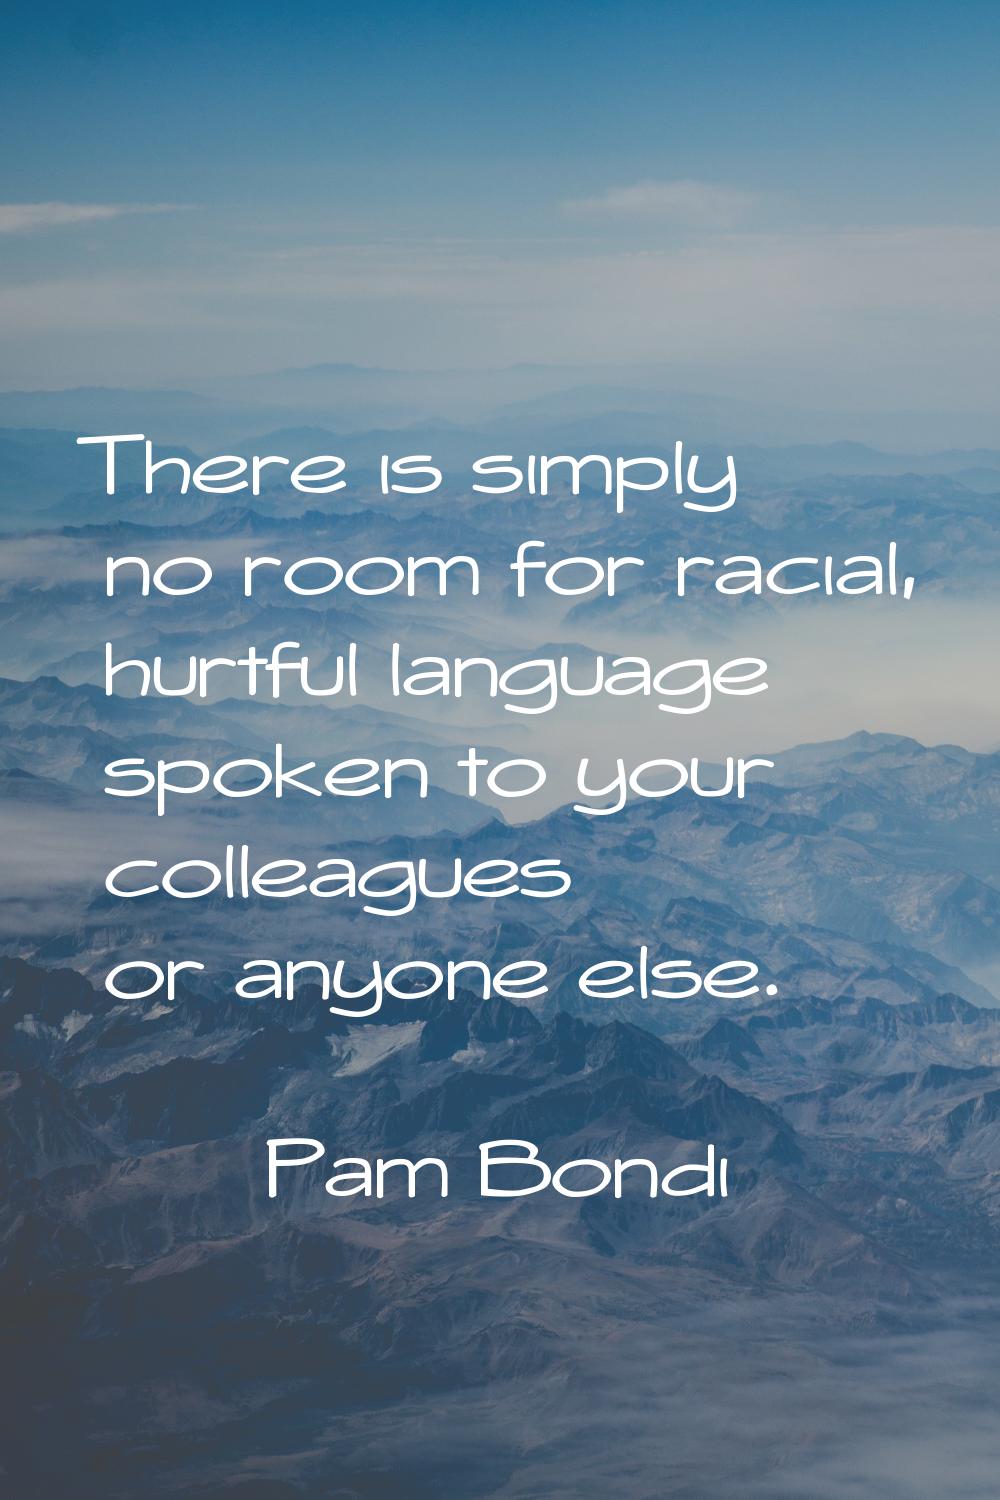 There is simply no room for racial, hurtful language spoken to your colleagues or anyone else.